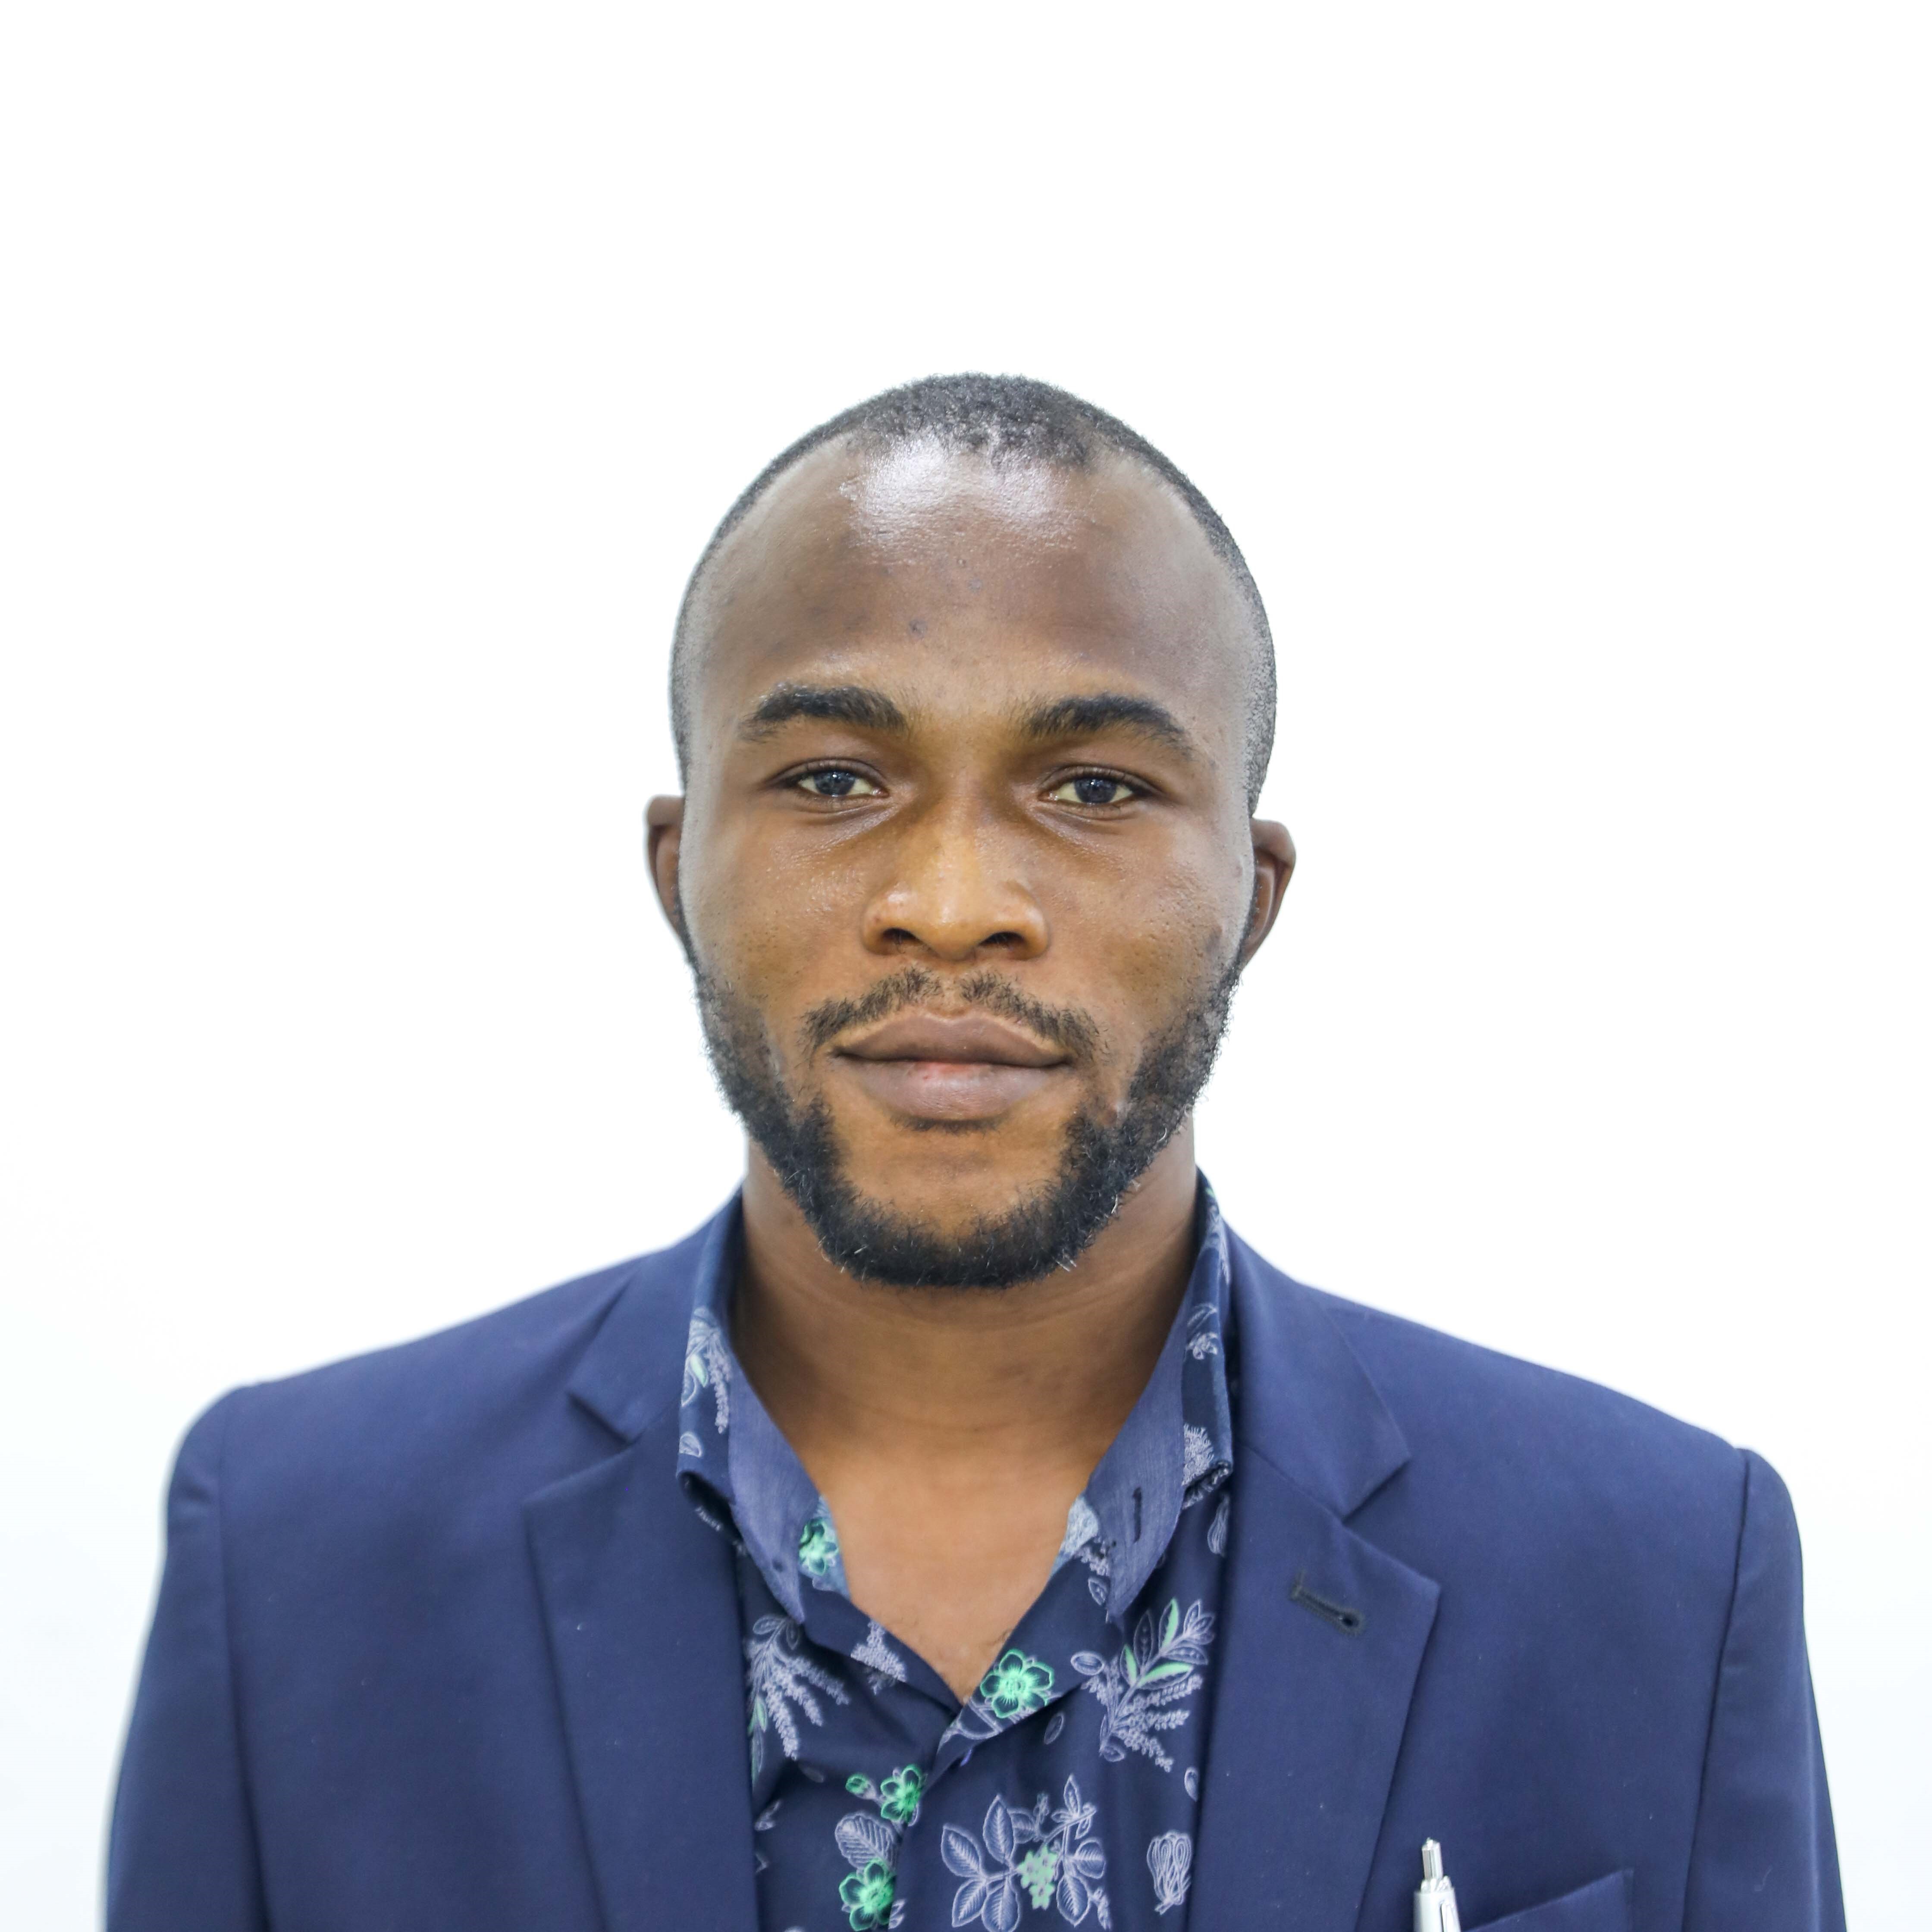 NBCC
                    Our Team - Samuel Babatunde,
                    Account Officer II